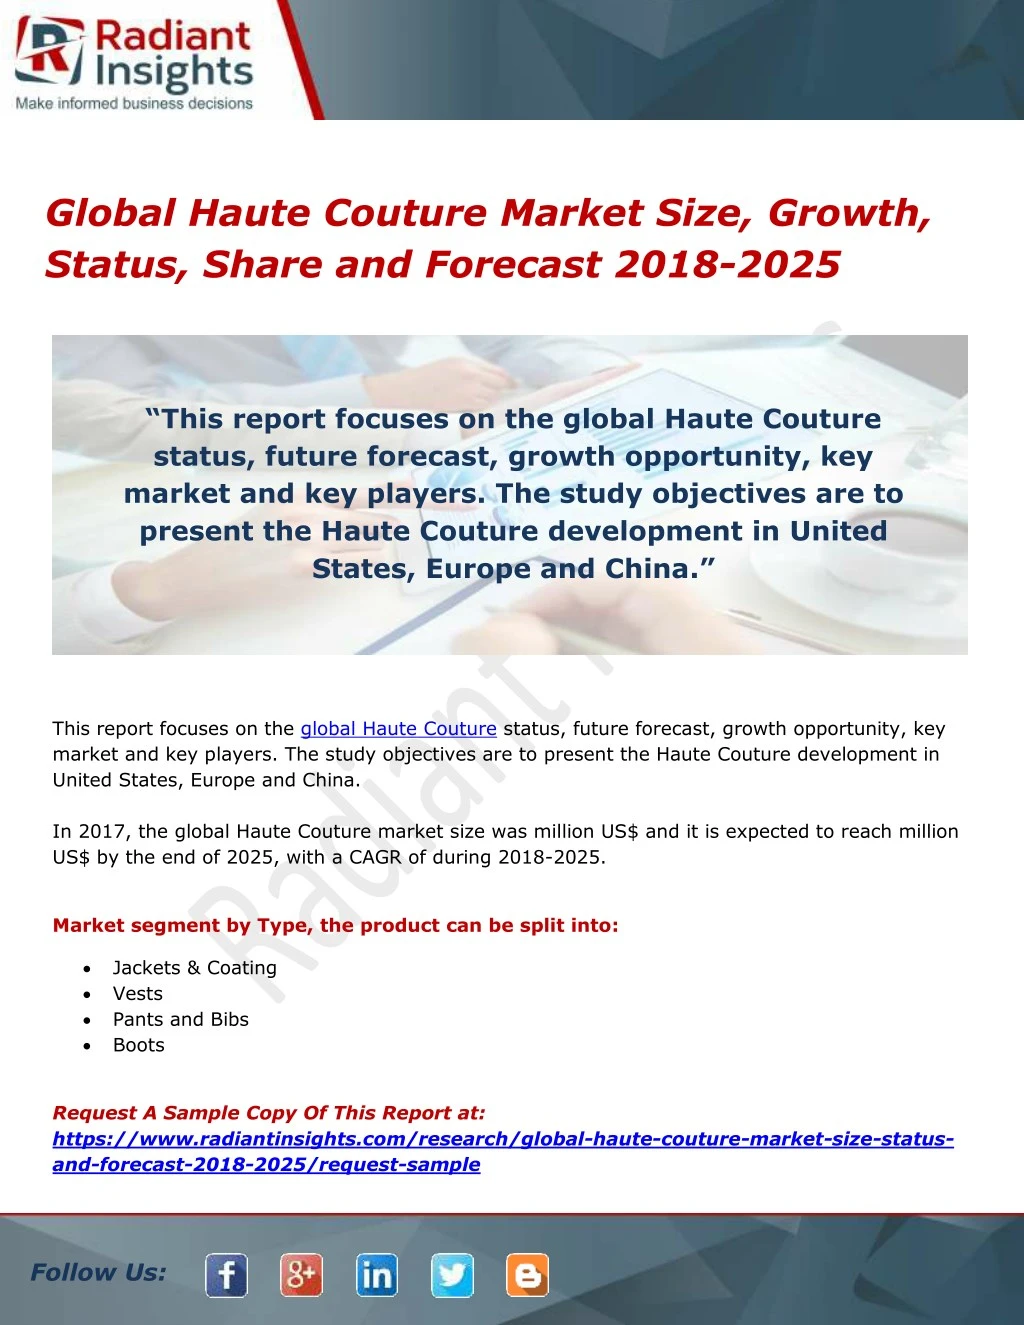 global haute couture market size growth status